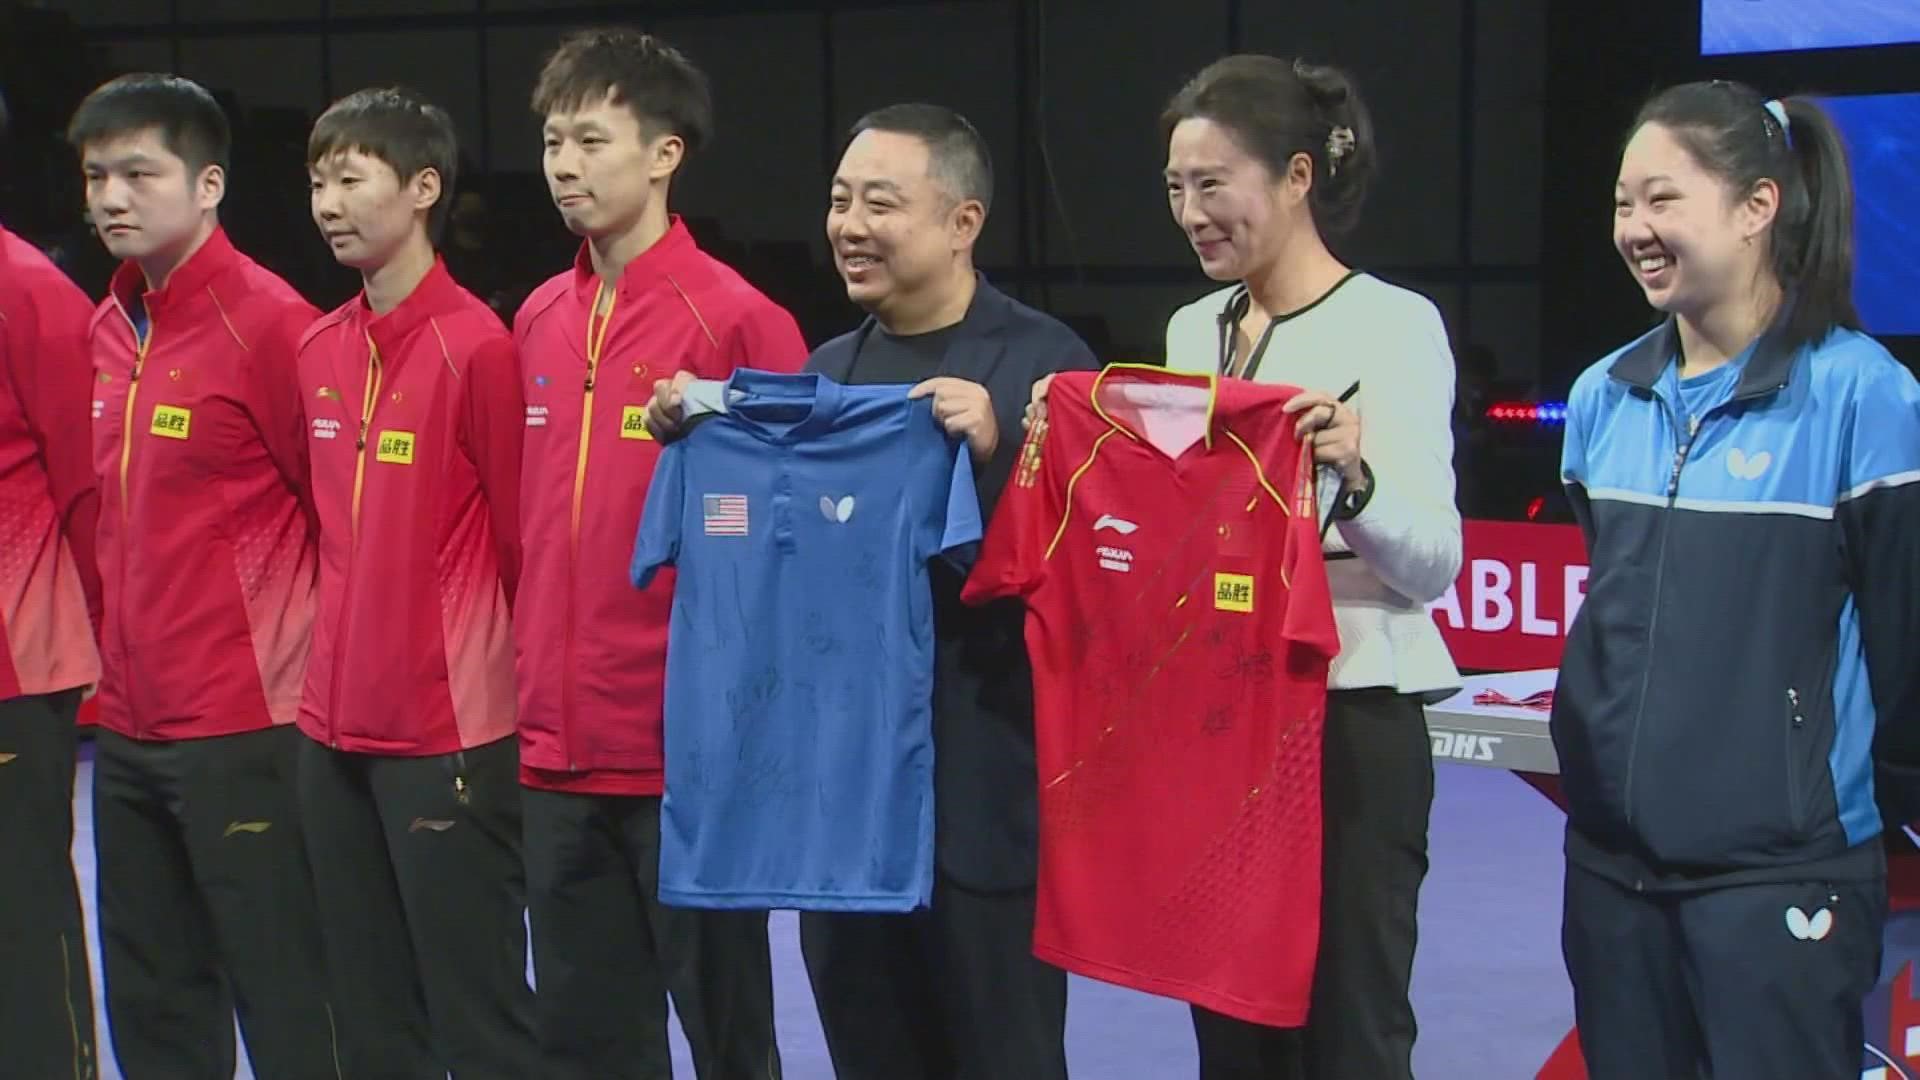 History will be made at 2021 World Table Tennis Championship Finals in Houston khou